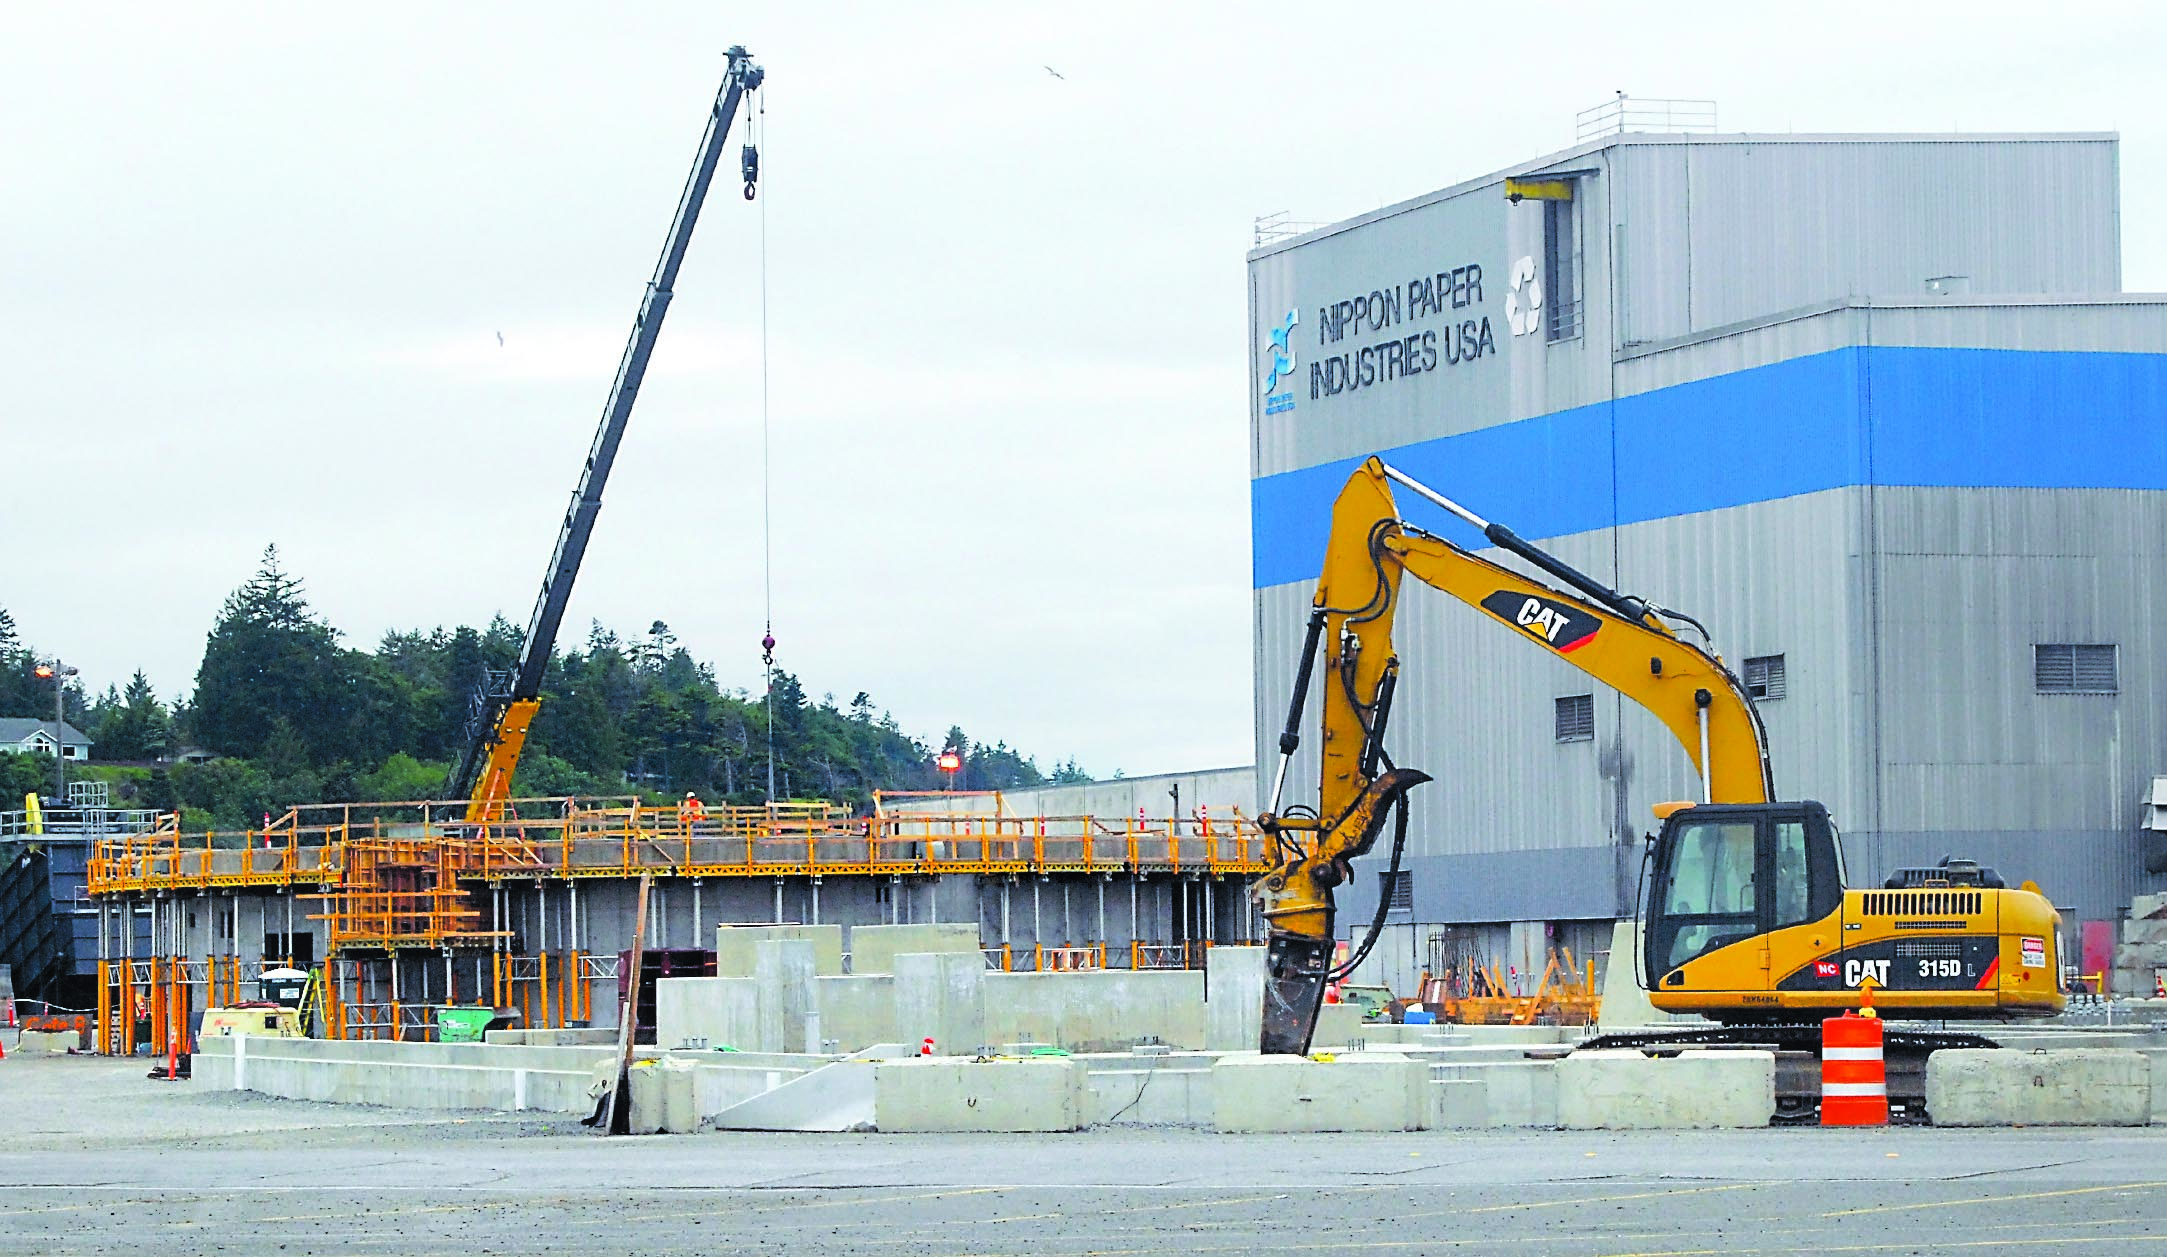 Work continues on the cogeneration plant at Nippon Paper Industries in Port Angeles. Keith Thorpe/Peninsula Daily News